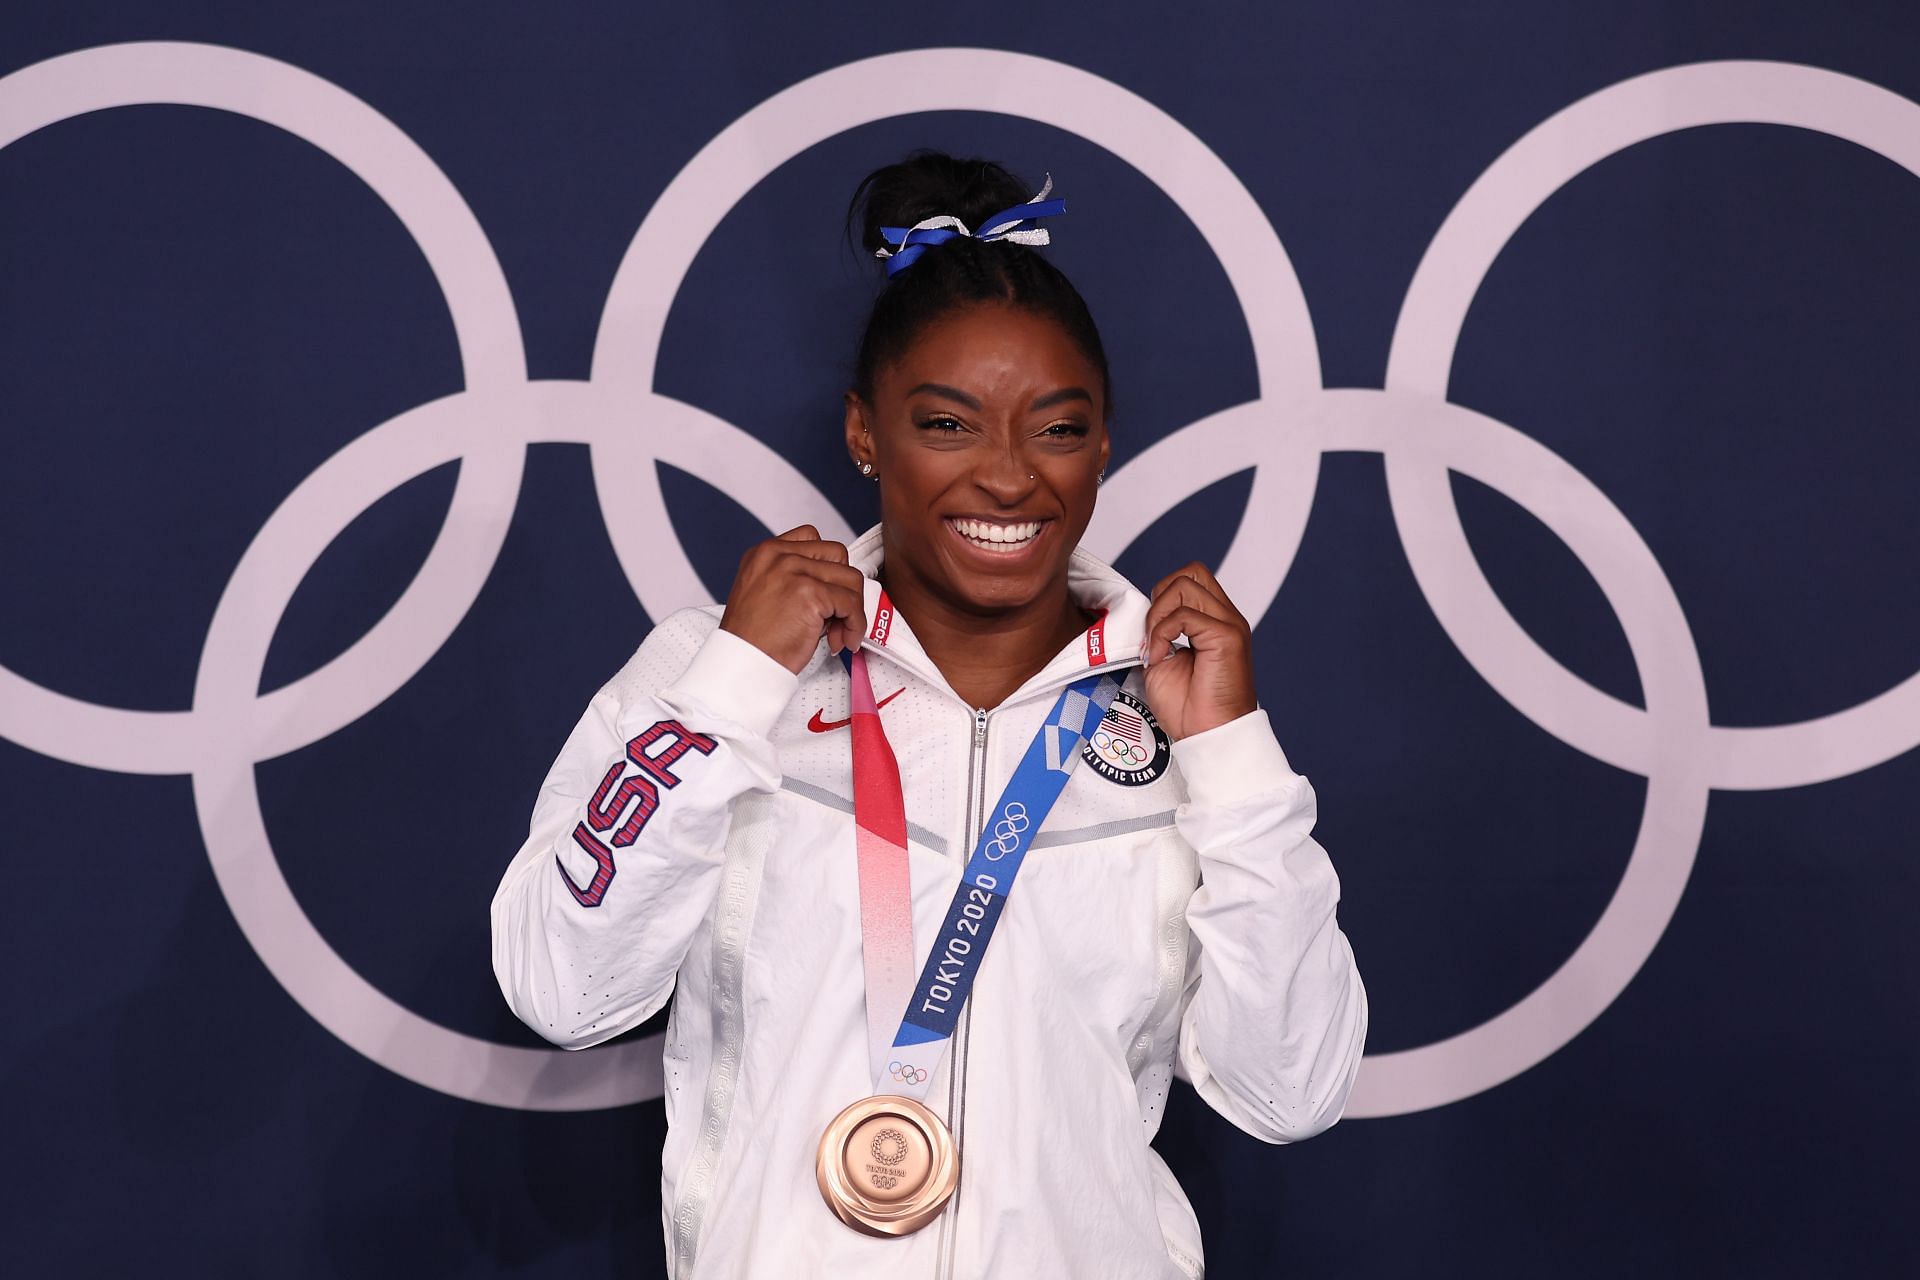 How old was Simone Biles when she started gymnastics?